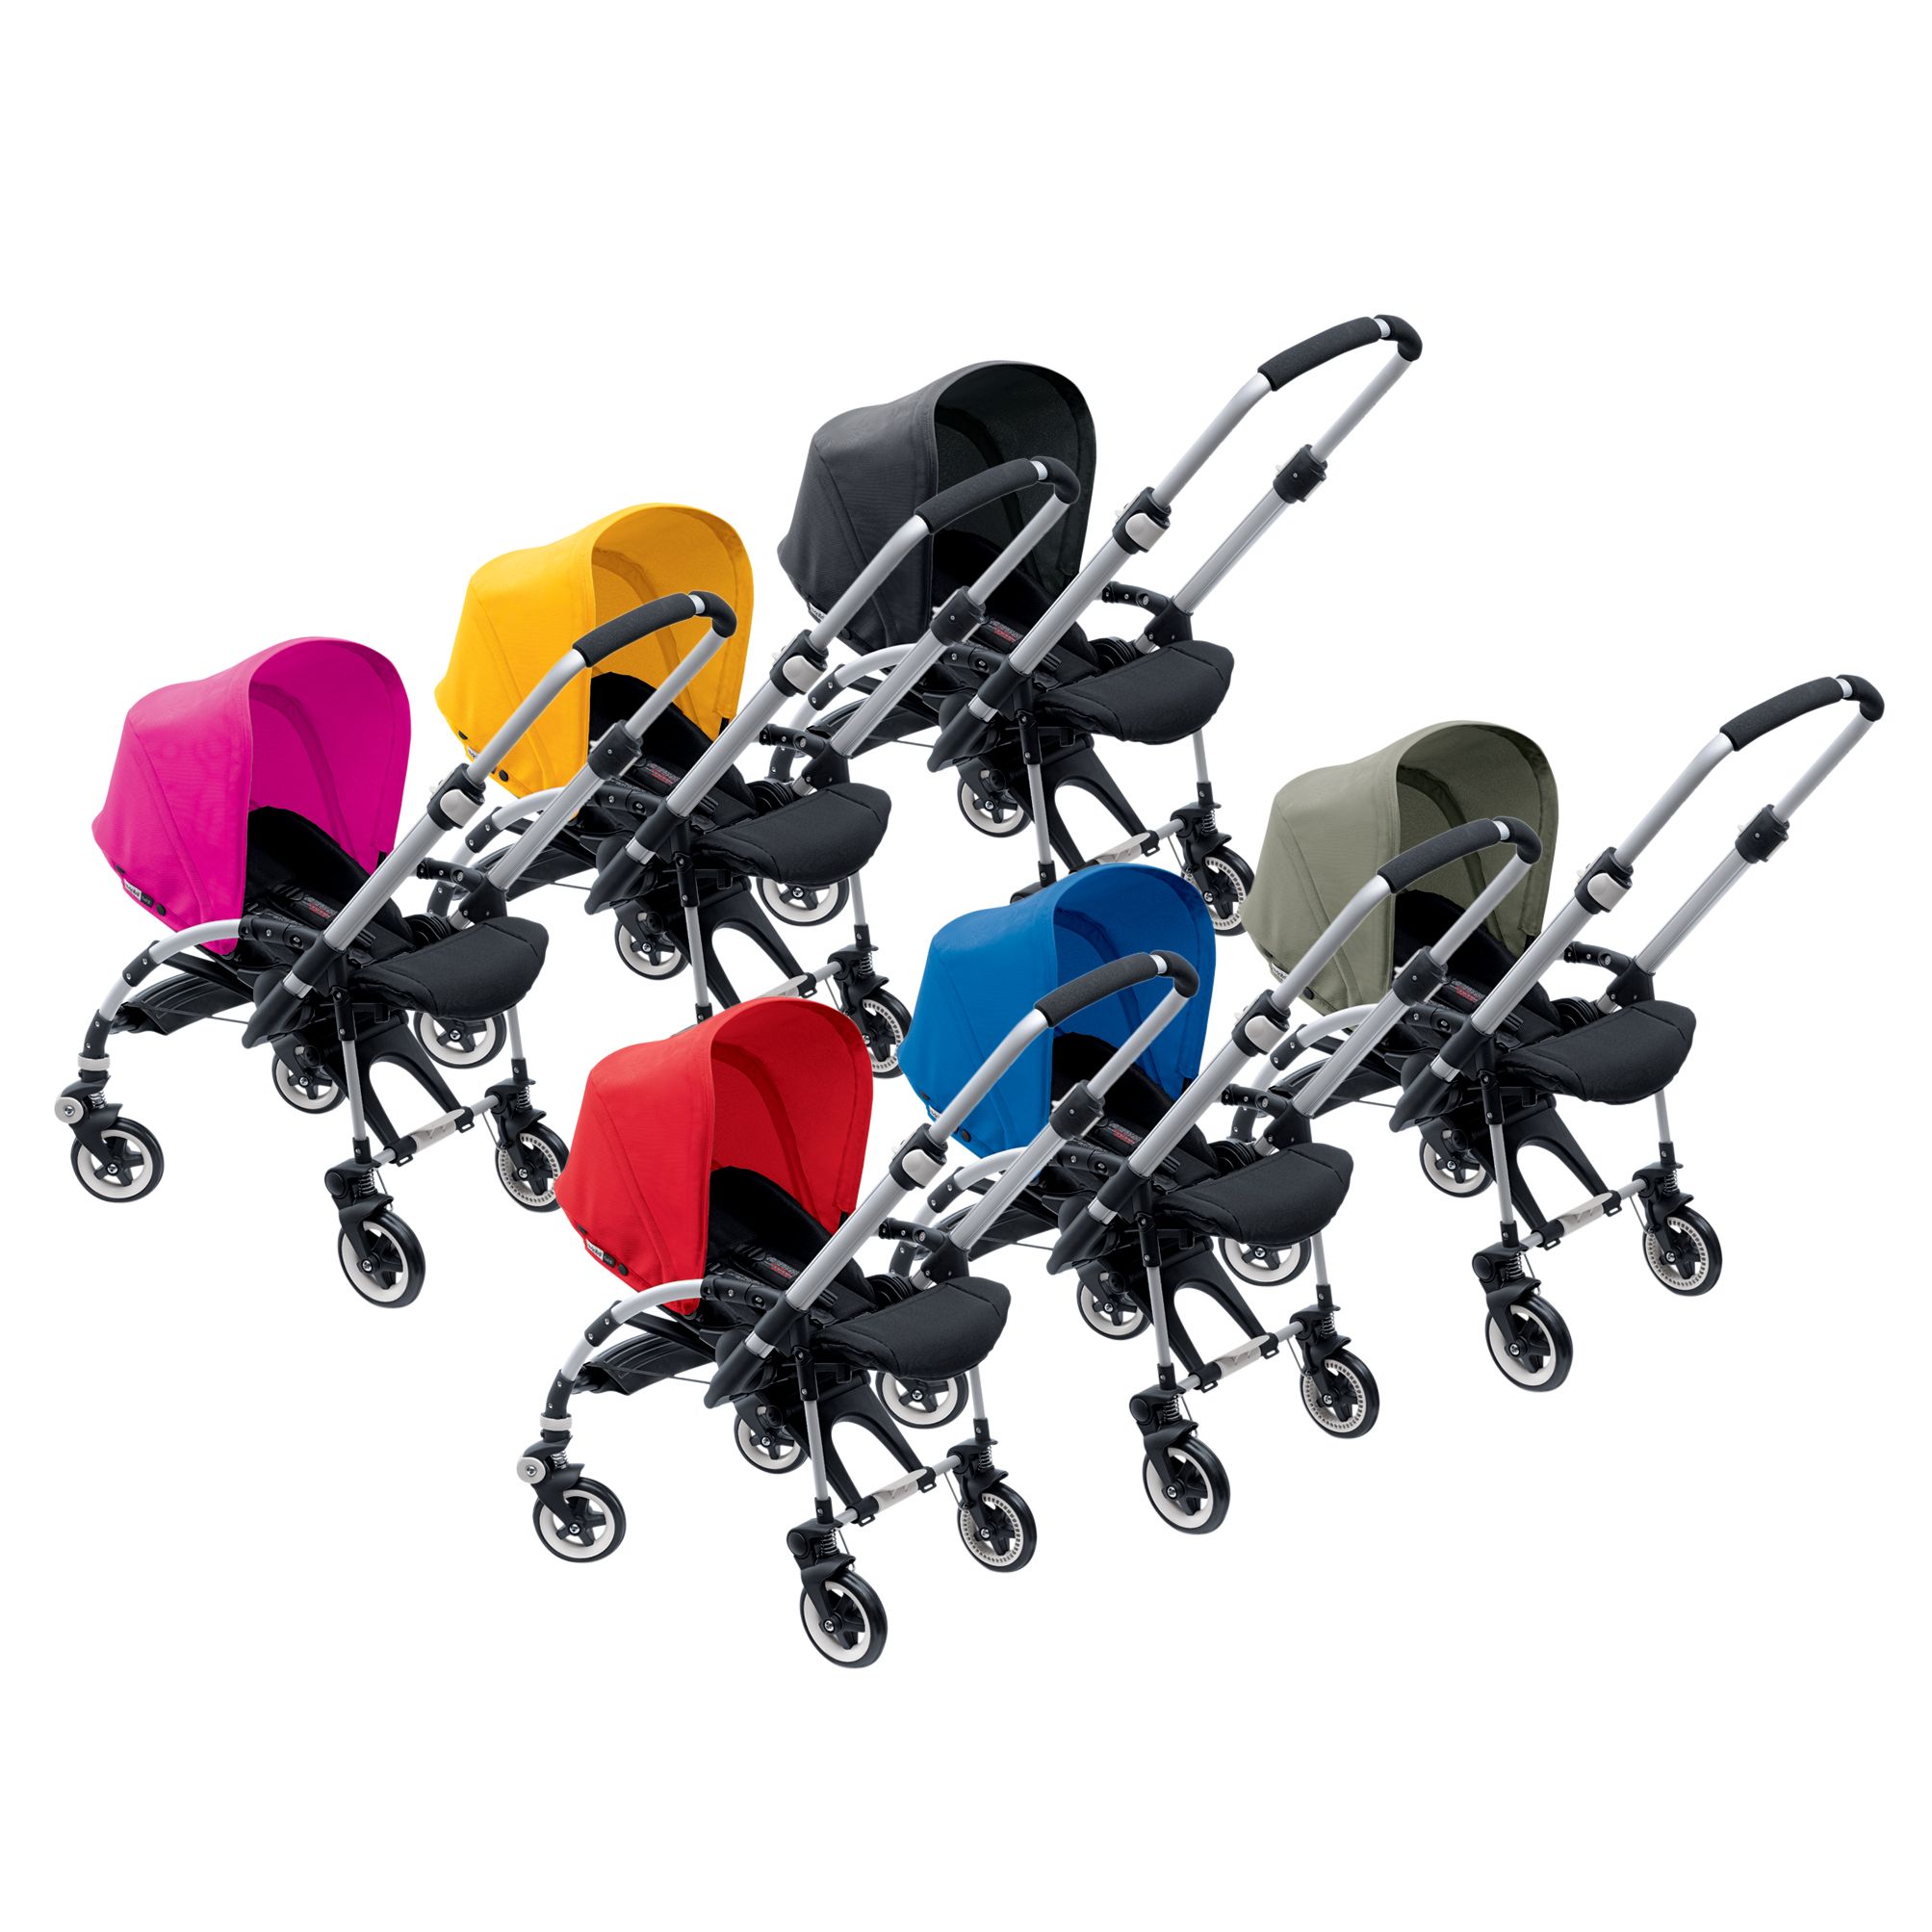 Bugaboo Bee Stroller and Base at John Lewis